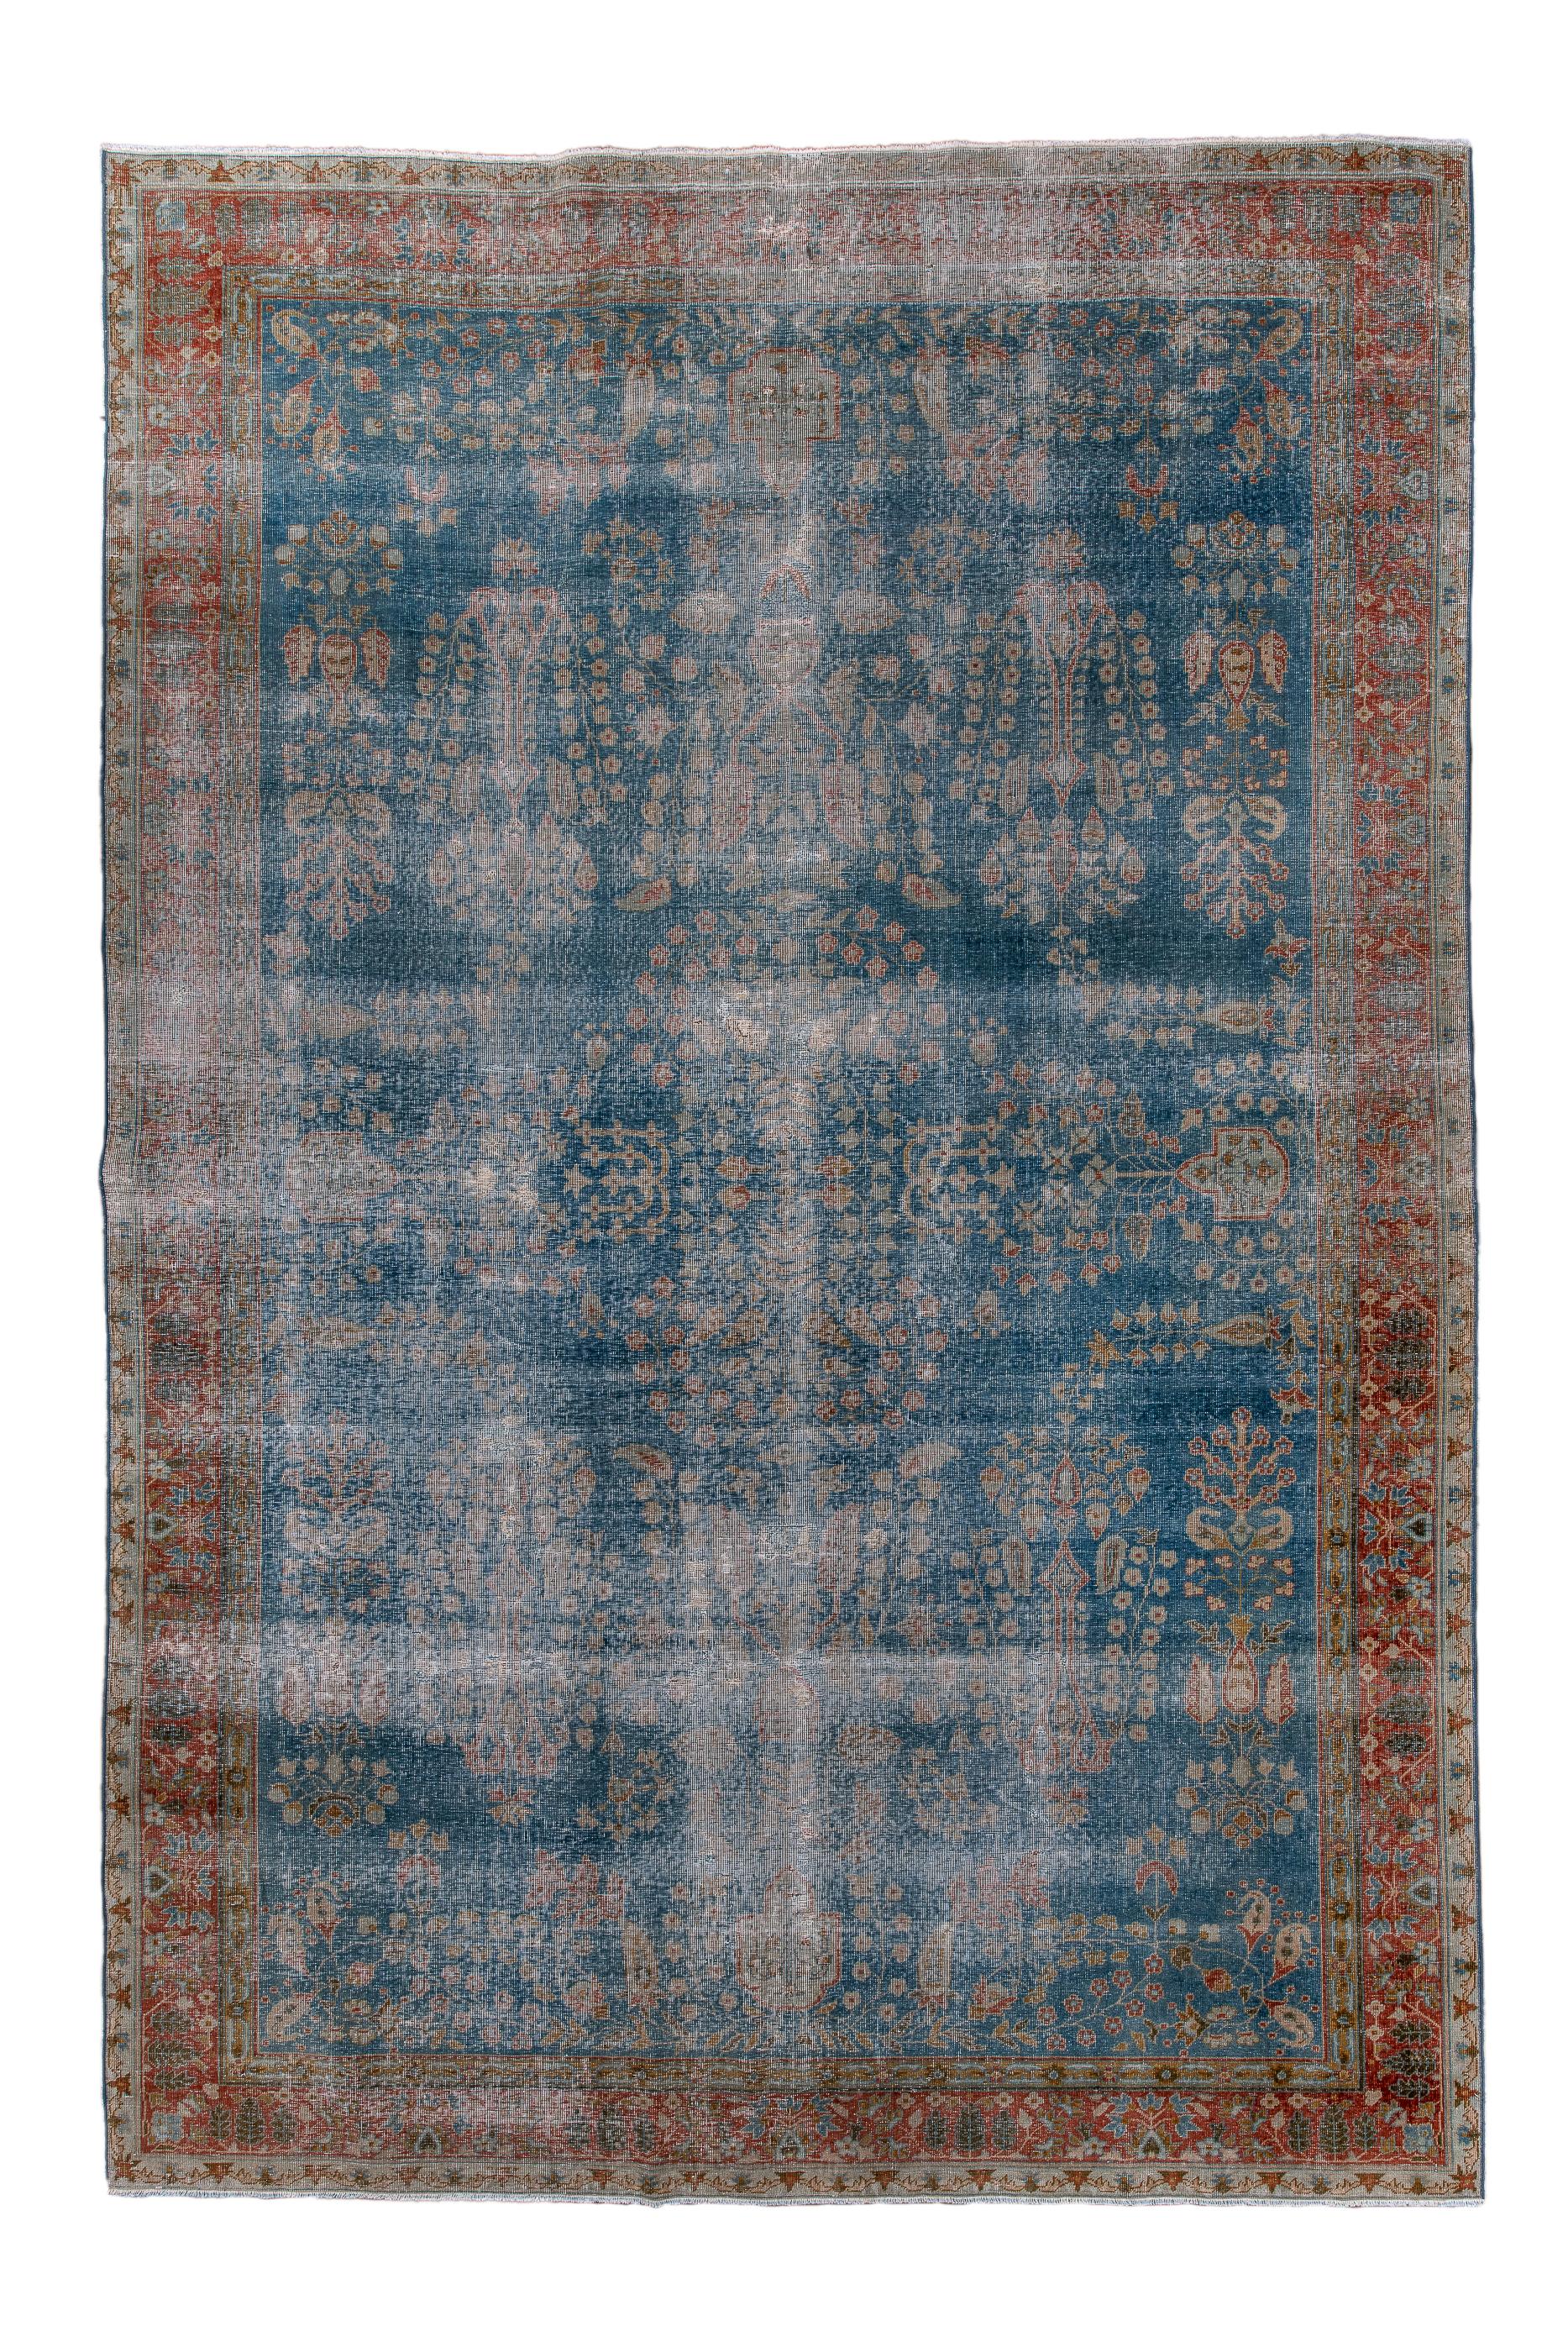 This distressed but still noble large scatter rug shows a royal blue field comfortably covered with detached floral sprays in the “American Sarouk” manner. The sprays are detailed in cream, stray and pistachio.  There are a few small botehs in the